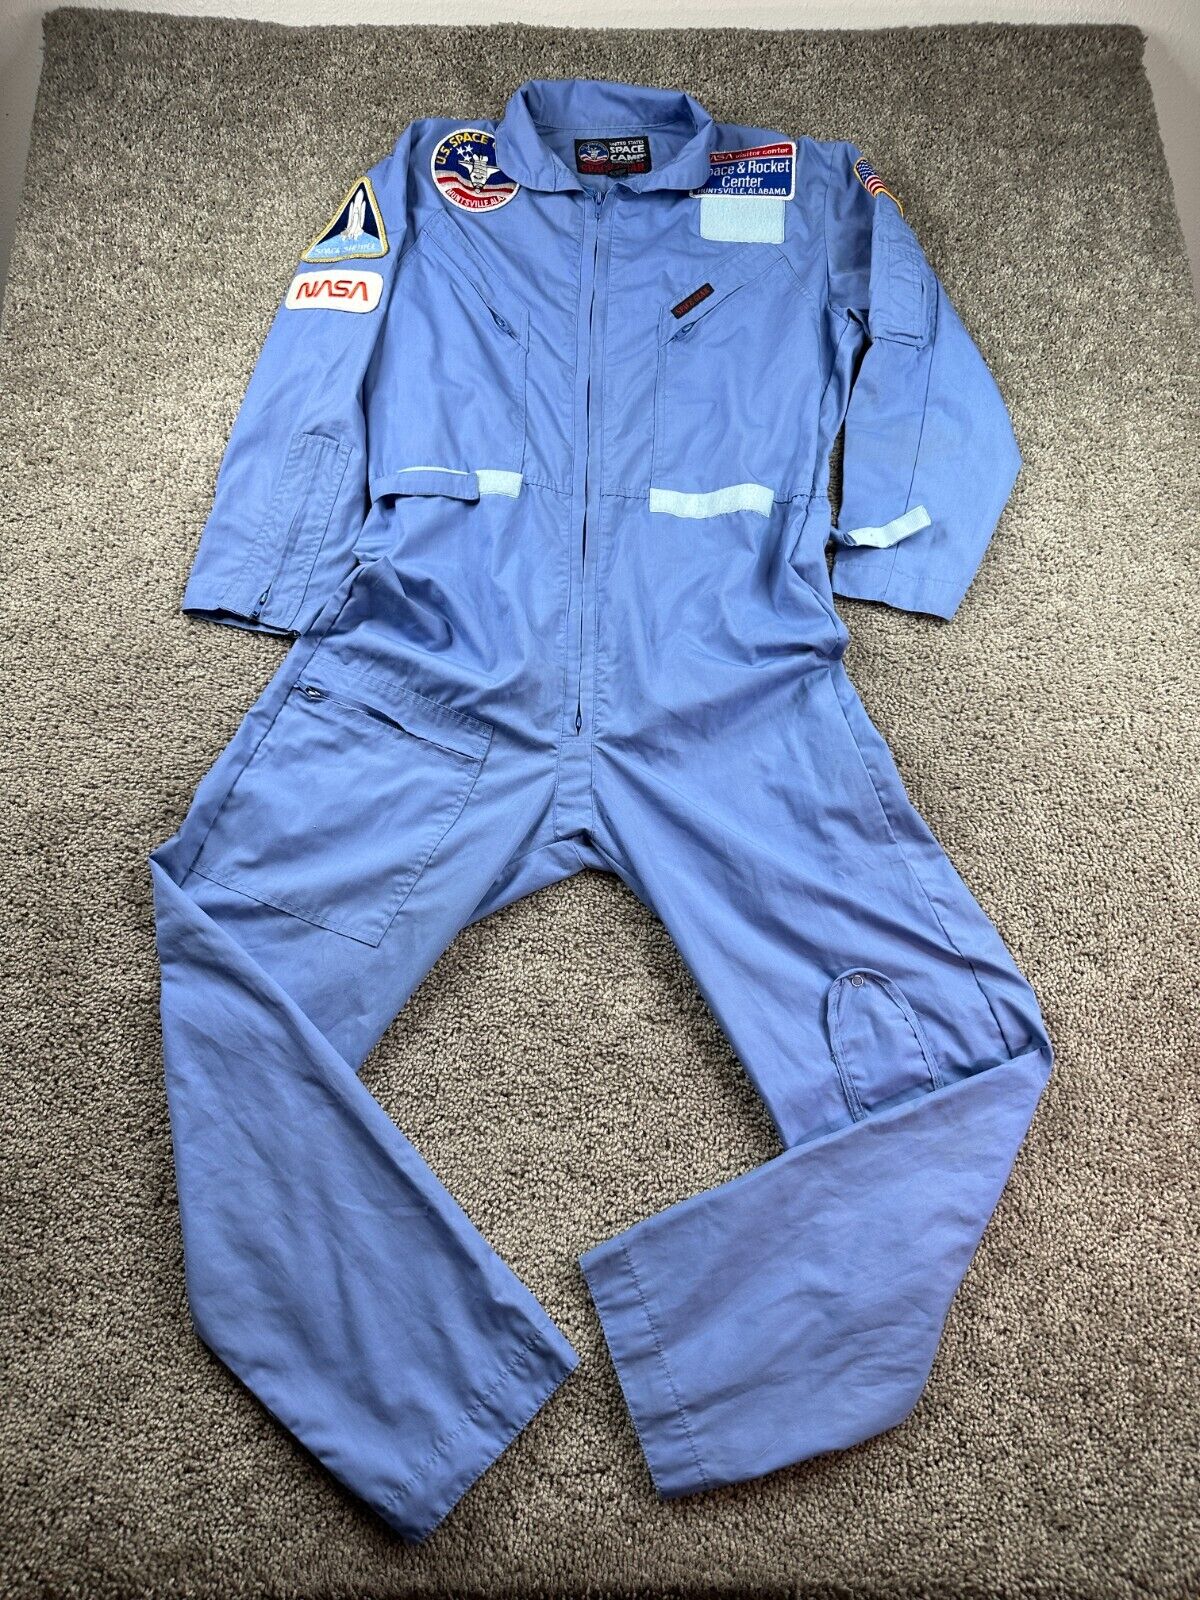 VINTAGE NASA Coveralls Fight Suit Mens M Blue USA Space Camp Huntsville FLAW